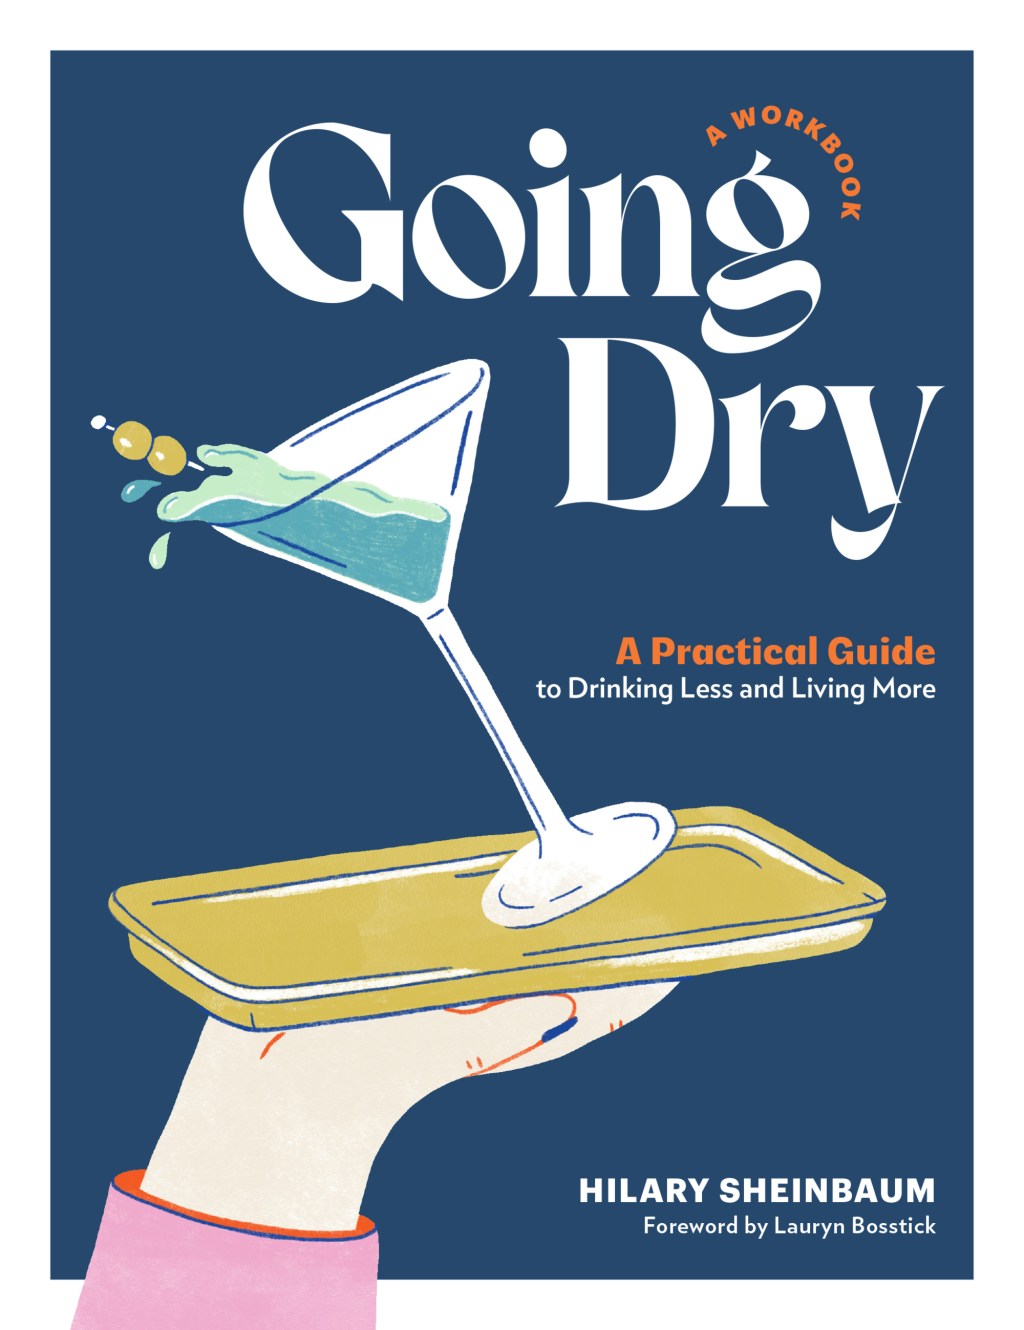 exclusive:-‘going-dry’-author-hilary-sheinbaum-talks-why-the-sober-curious-movement-has-exploded-in popularity